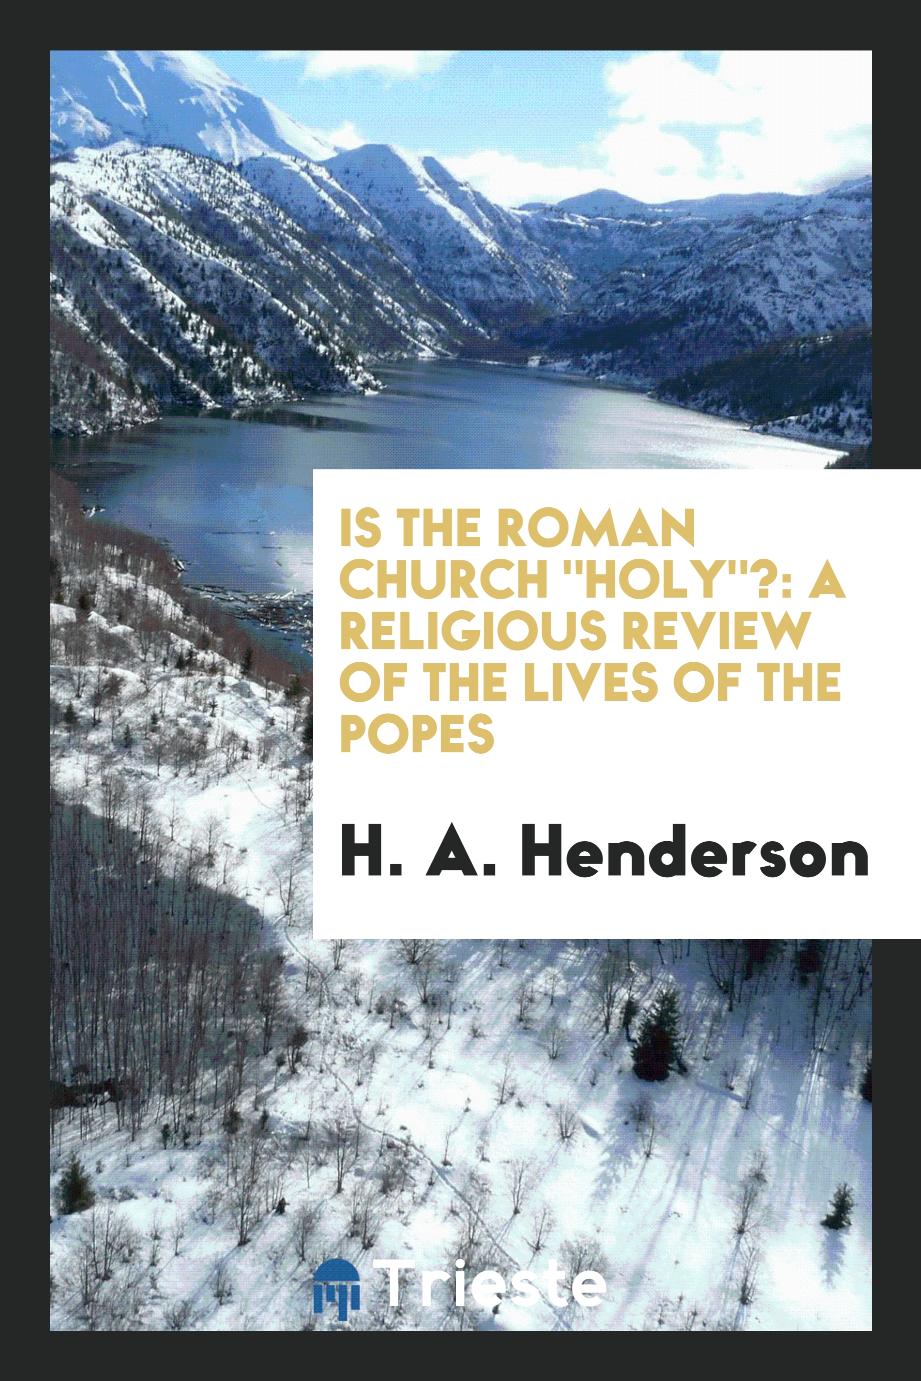 Is the Roman church "Holy"?: a religious review of the lives of the popes